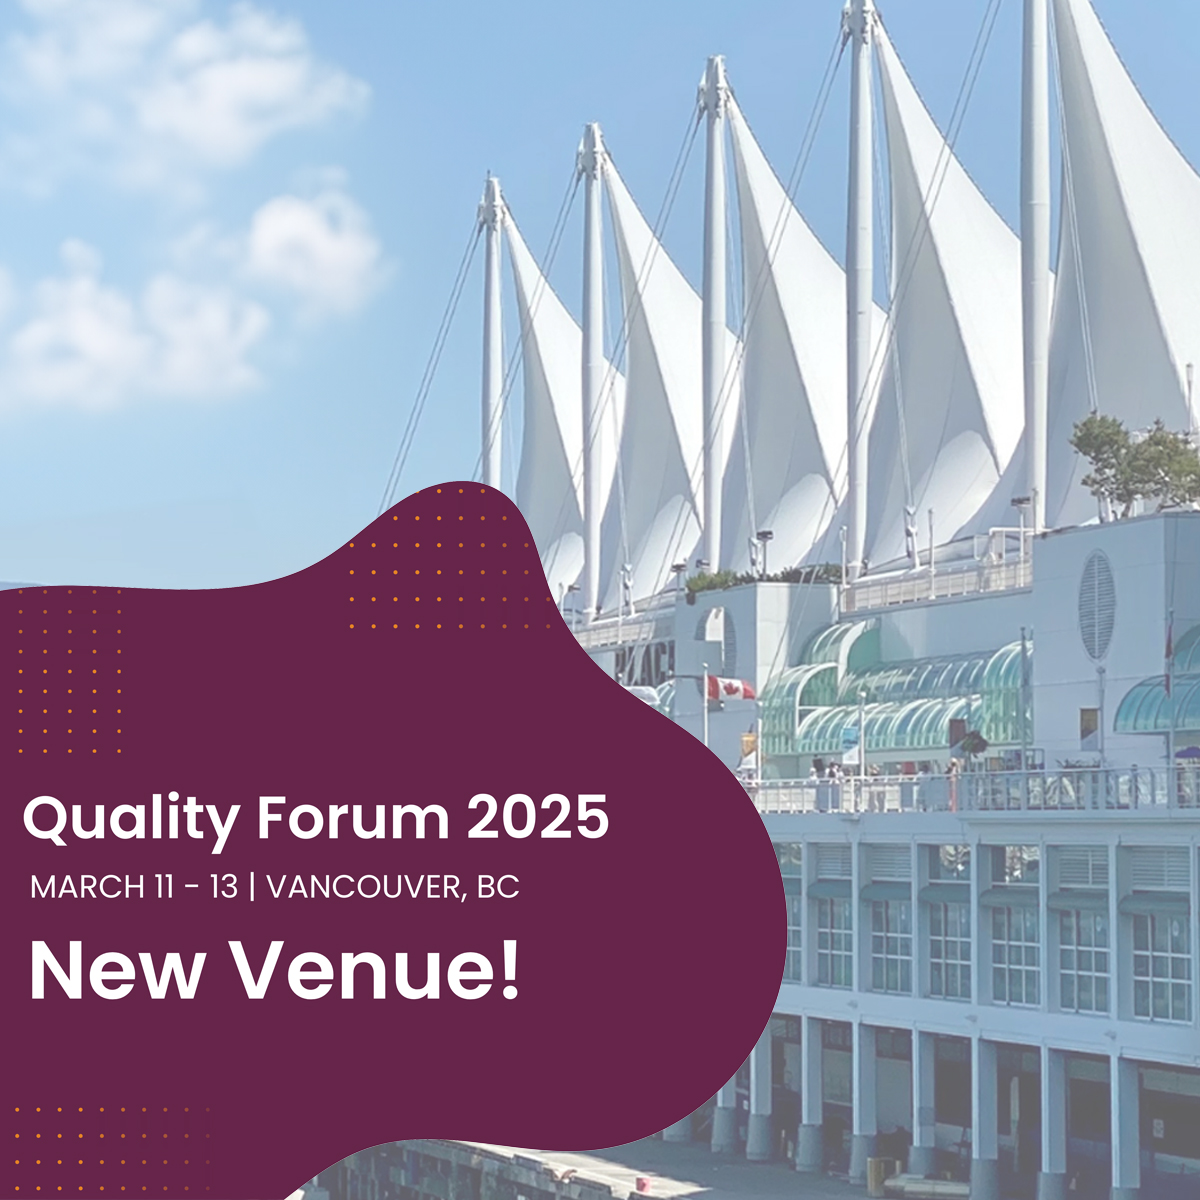 We’re excited to announce that Quality Forum 2025 will take place at the Vancouver Convention Centre. Subscribe to our newsletter for updates on registration launch next year. ow.ly/BuIm50Rkbai #QF25